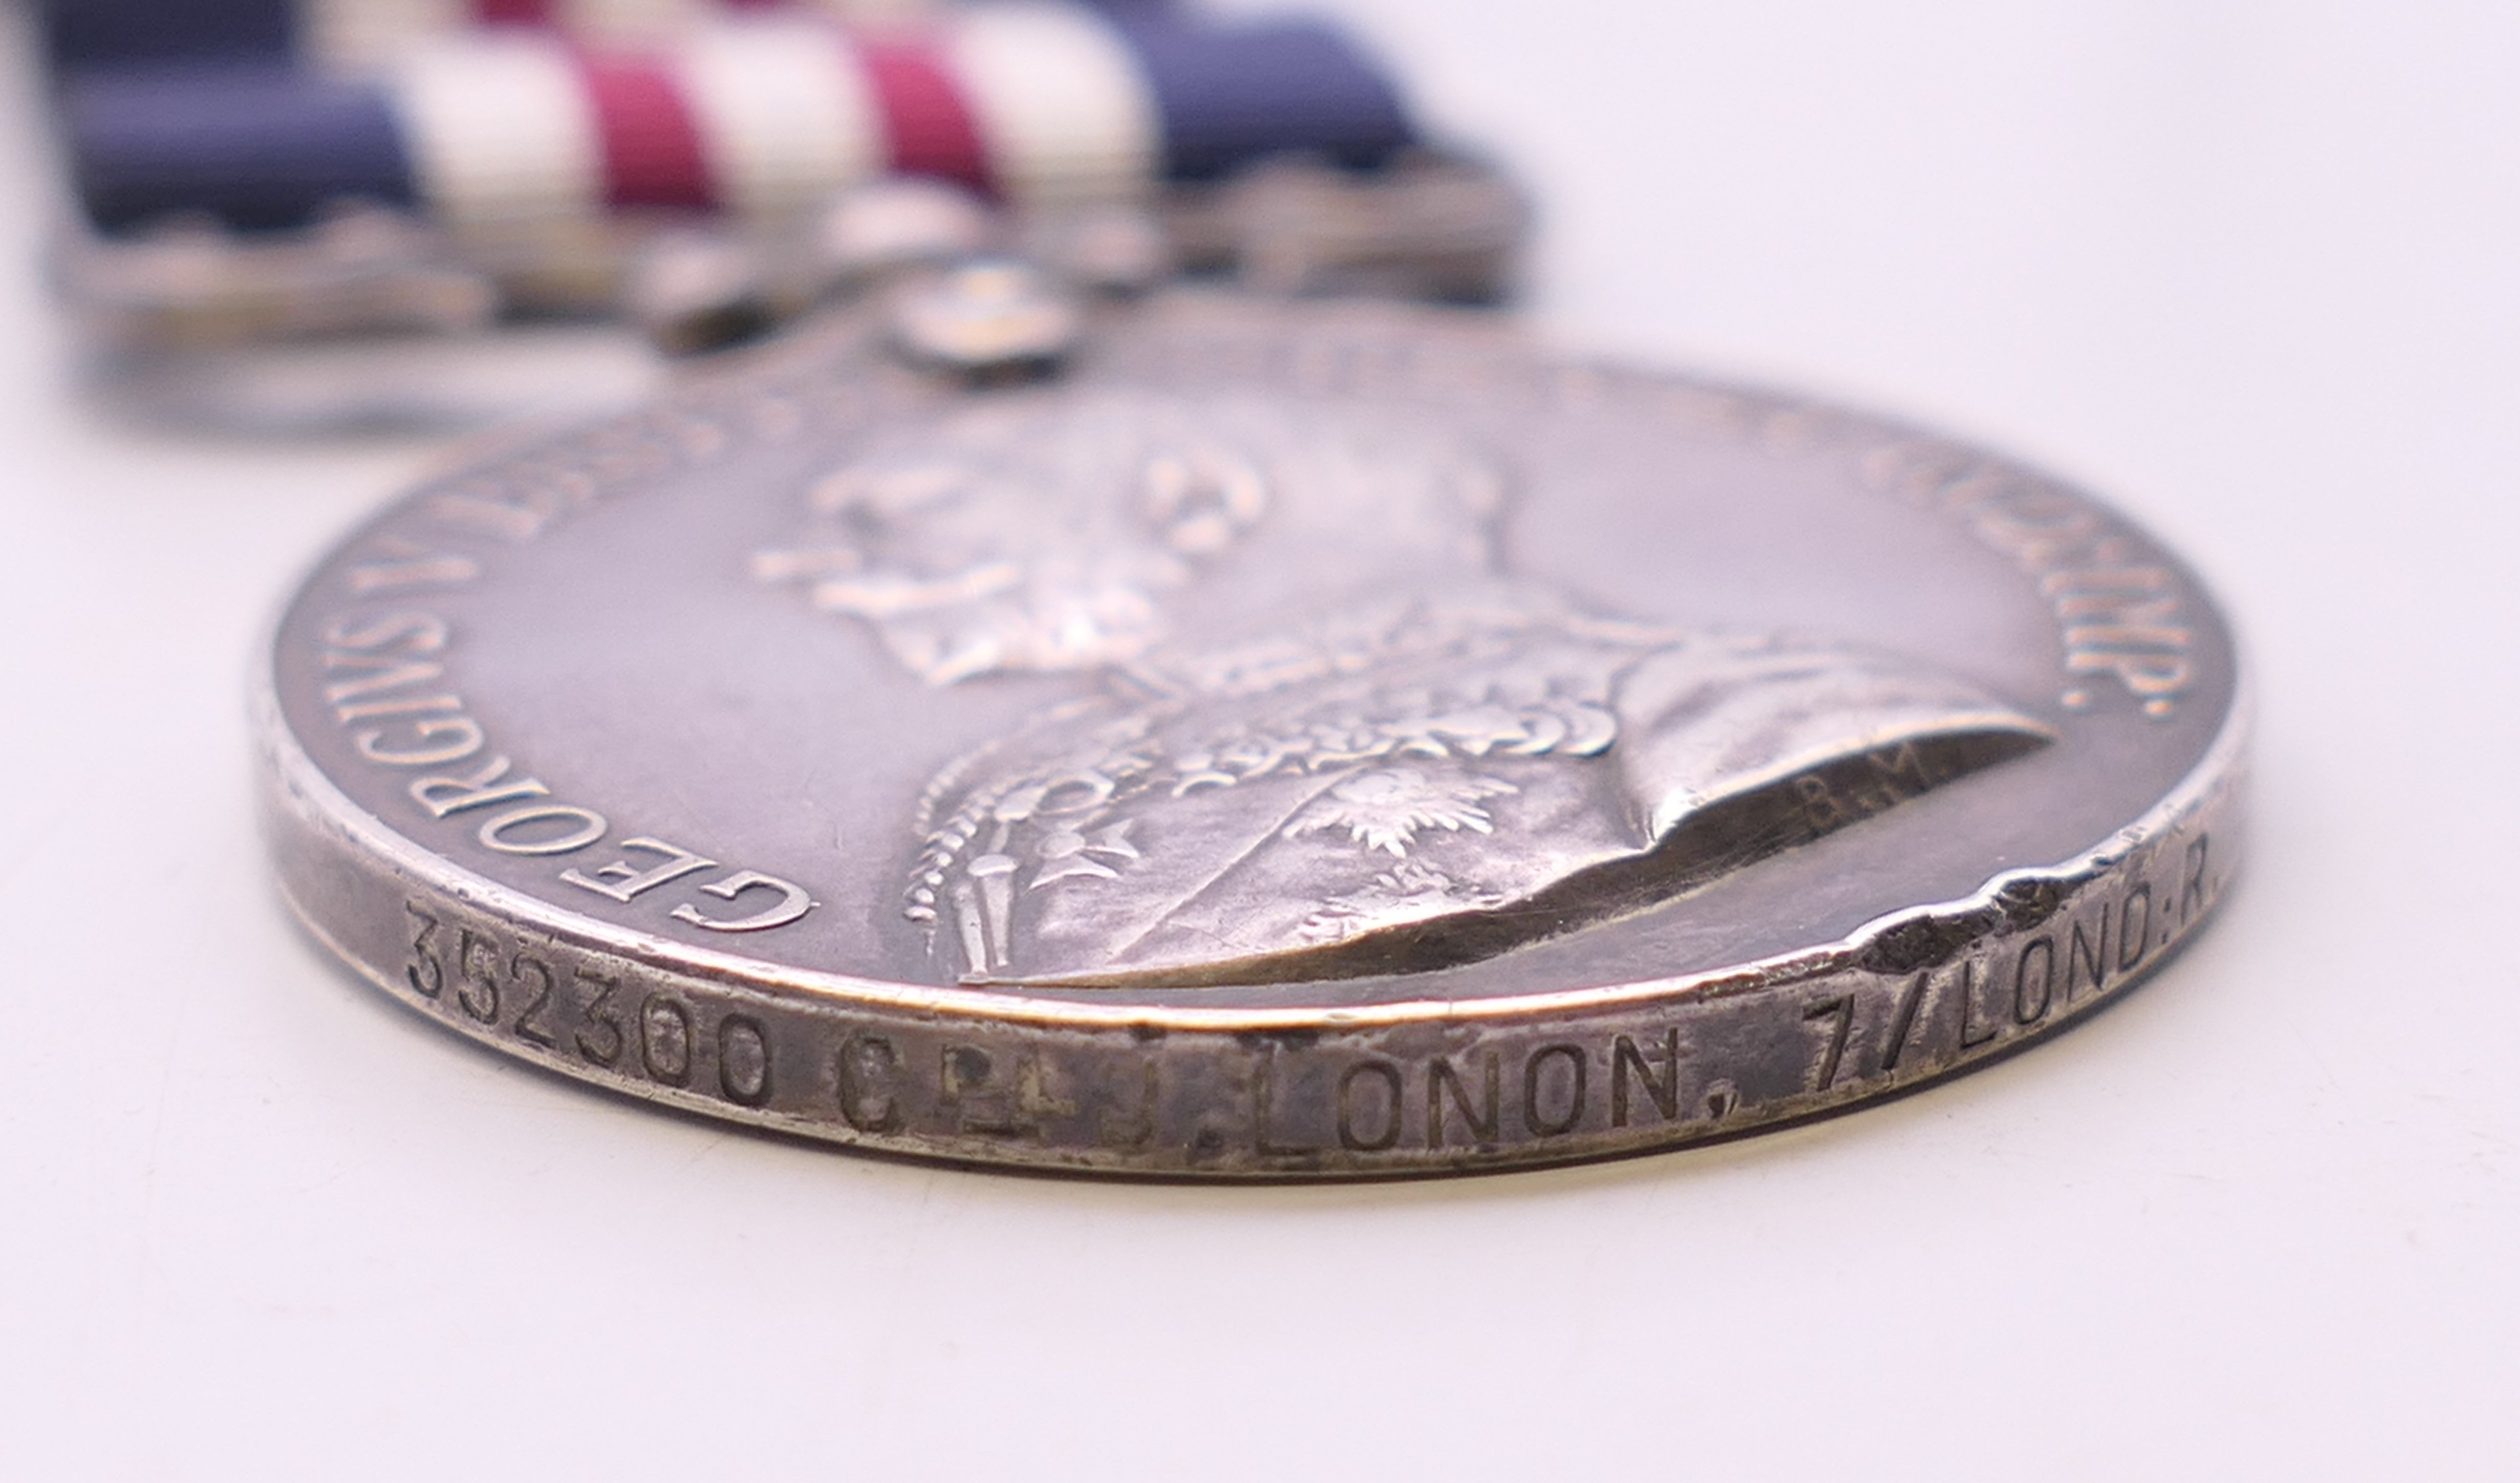 Two WWI medals, including the Victory Medal named to 5380 CPL J Lonon 7-LOND.R. - Image 7 of 11